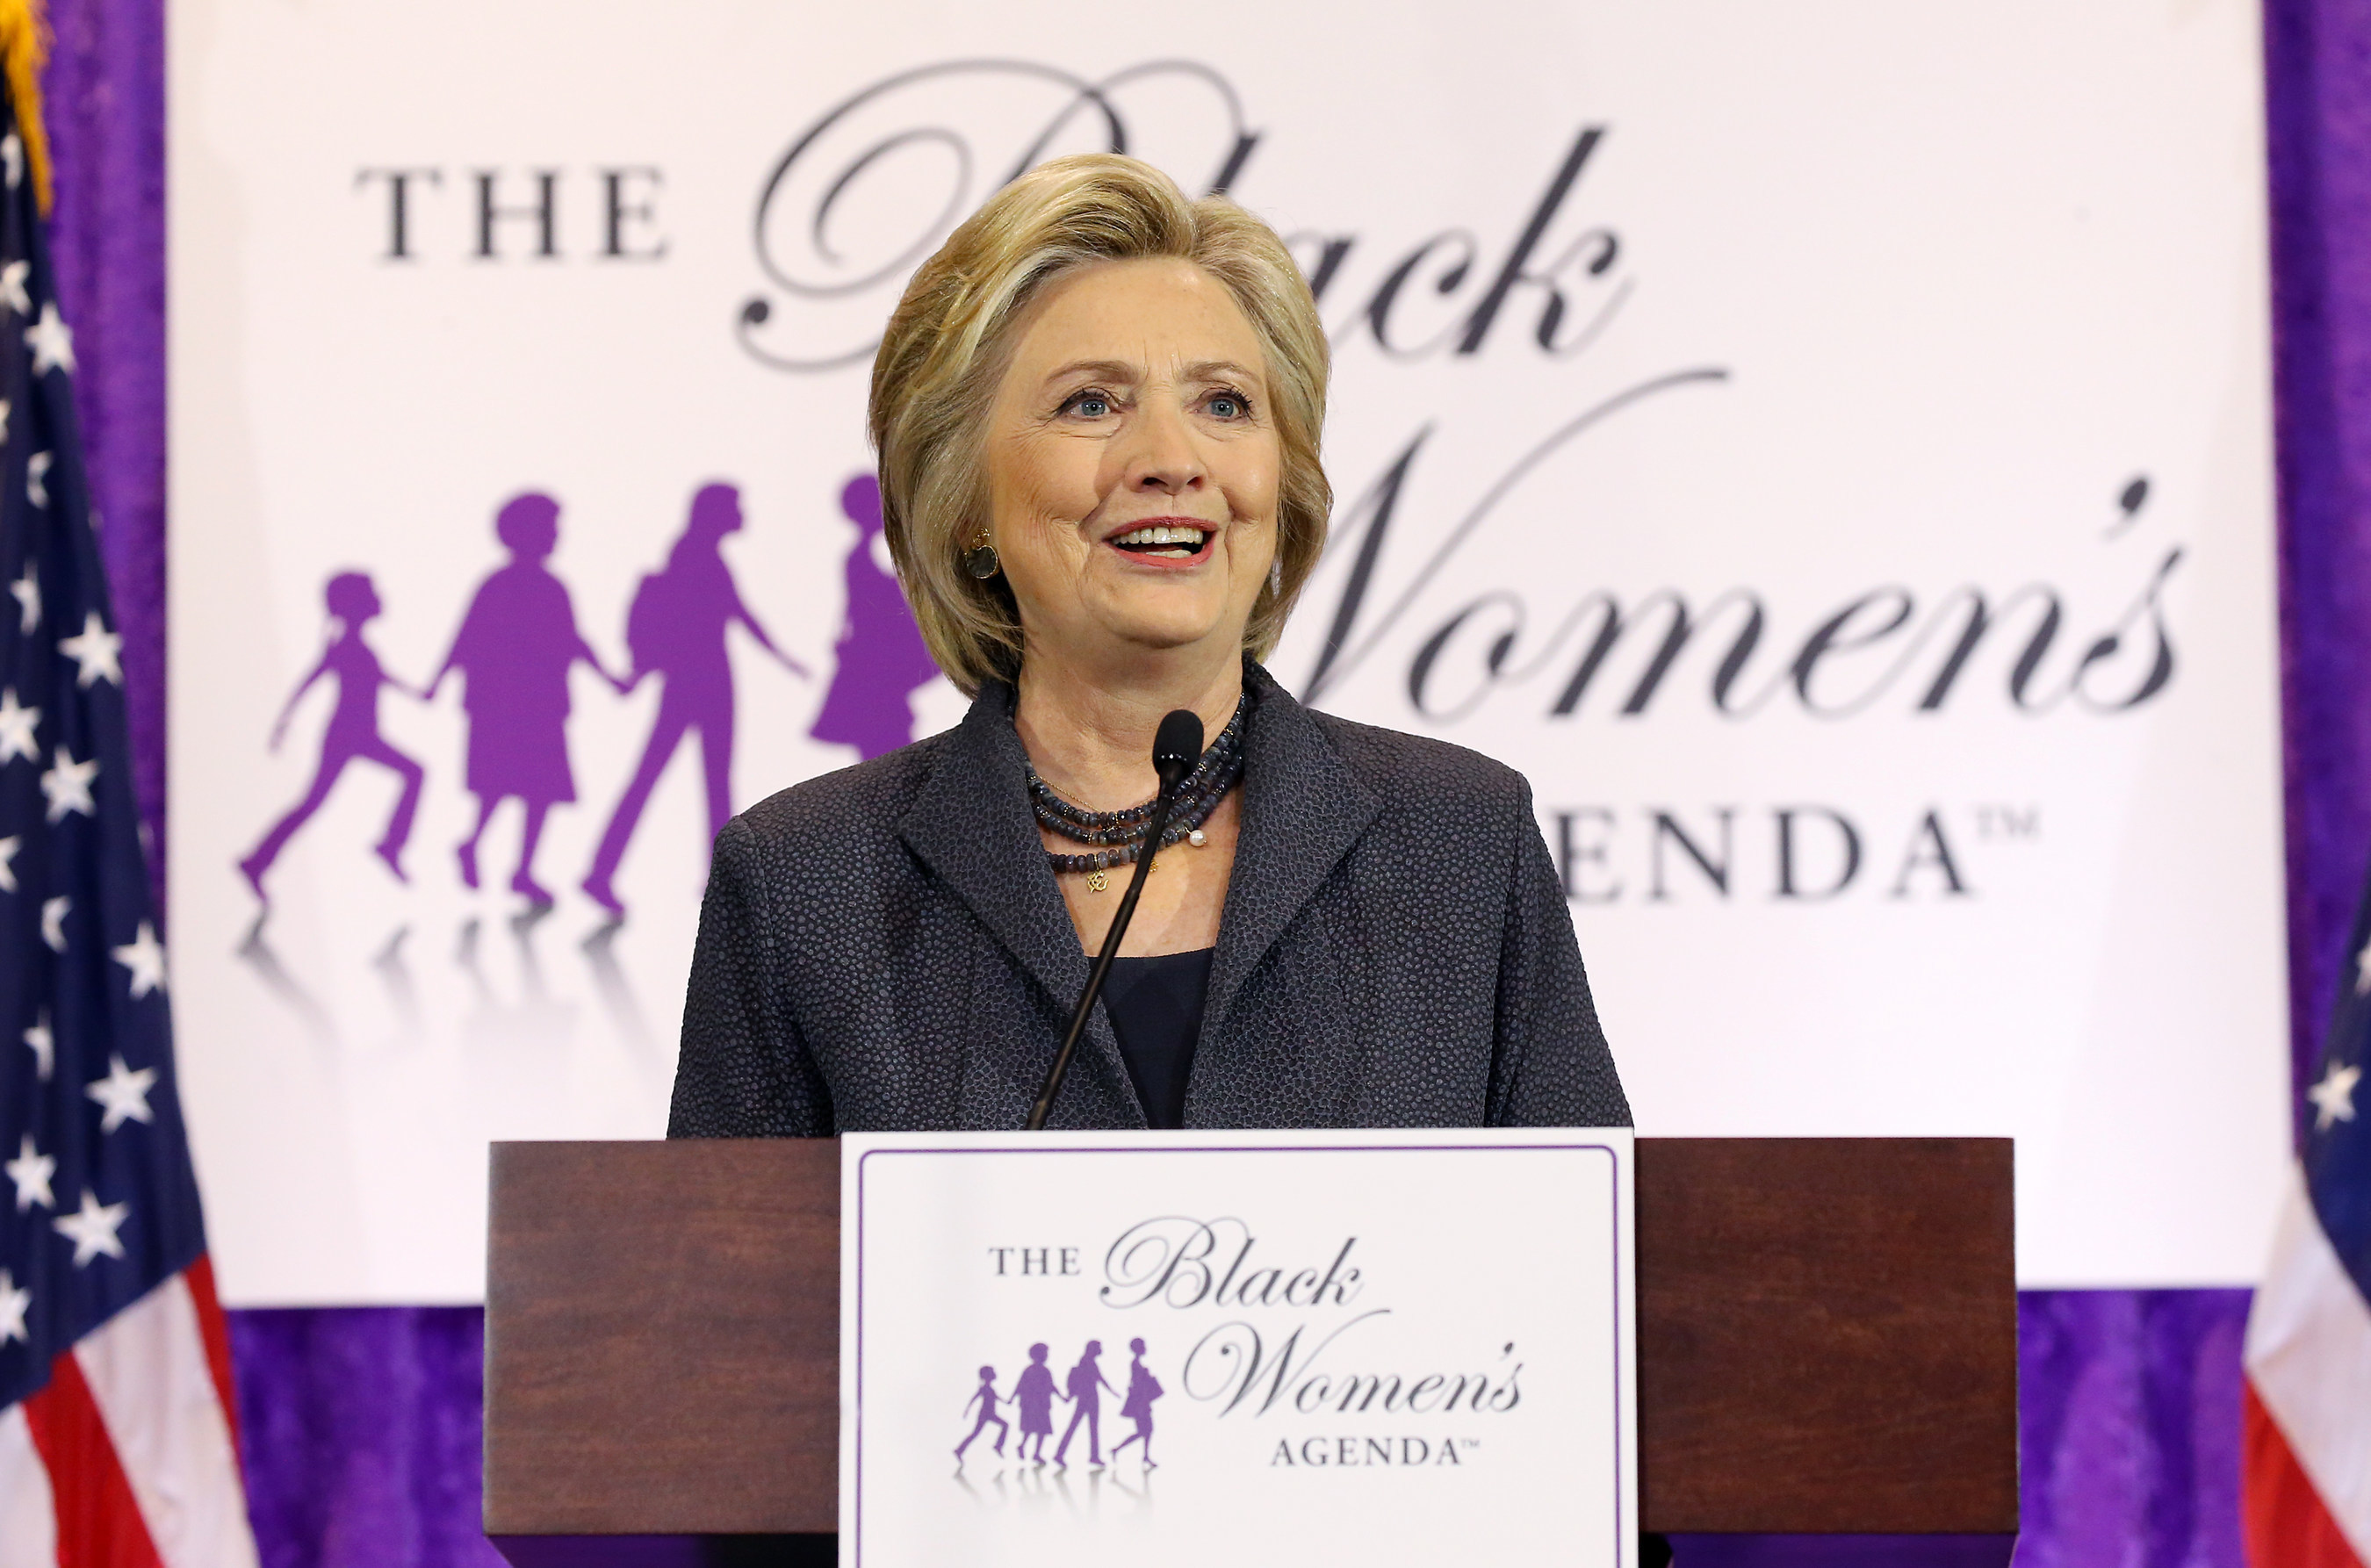 Democratic Presidential Nominee Hillary Rodham Clinton addressed more than 600 participants at The Black Women's Agenda, Inc. 39th Annual Symposium on Friday, September 16, 2016 in Washington, DC. (Paul Morigi/AP Images for The Black Women's Agenda, Inc.)